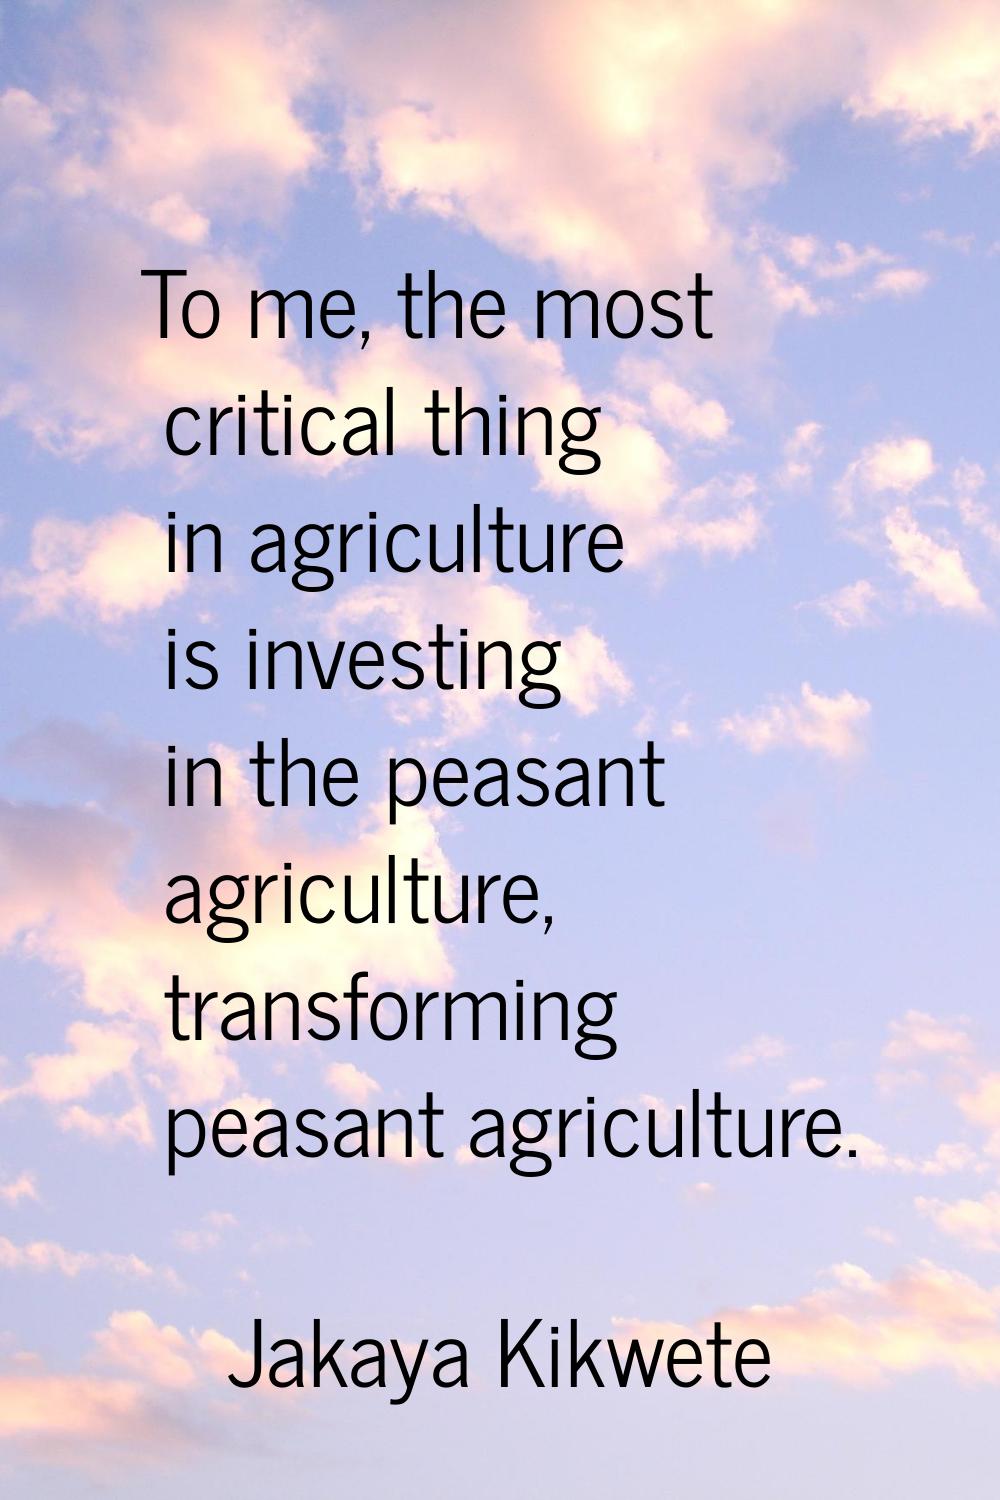 To me, the most critical thing in agriculture is investing in the peasant agriculture, transforming